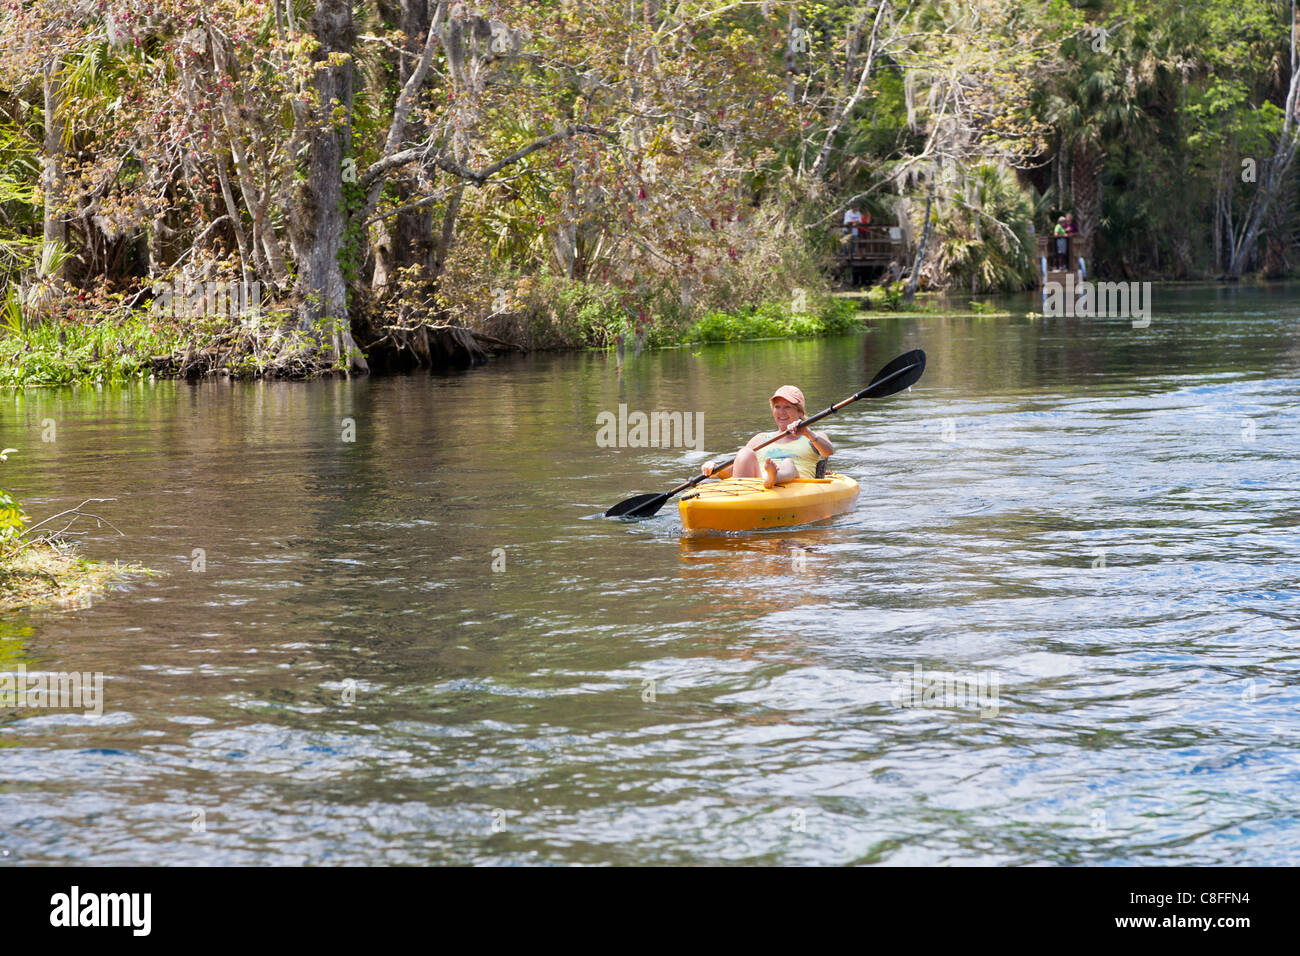 Young woman kayaking in orange kayak on Silver River near Silver Springs Attractions in Ocala Florida Stock Photo